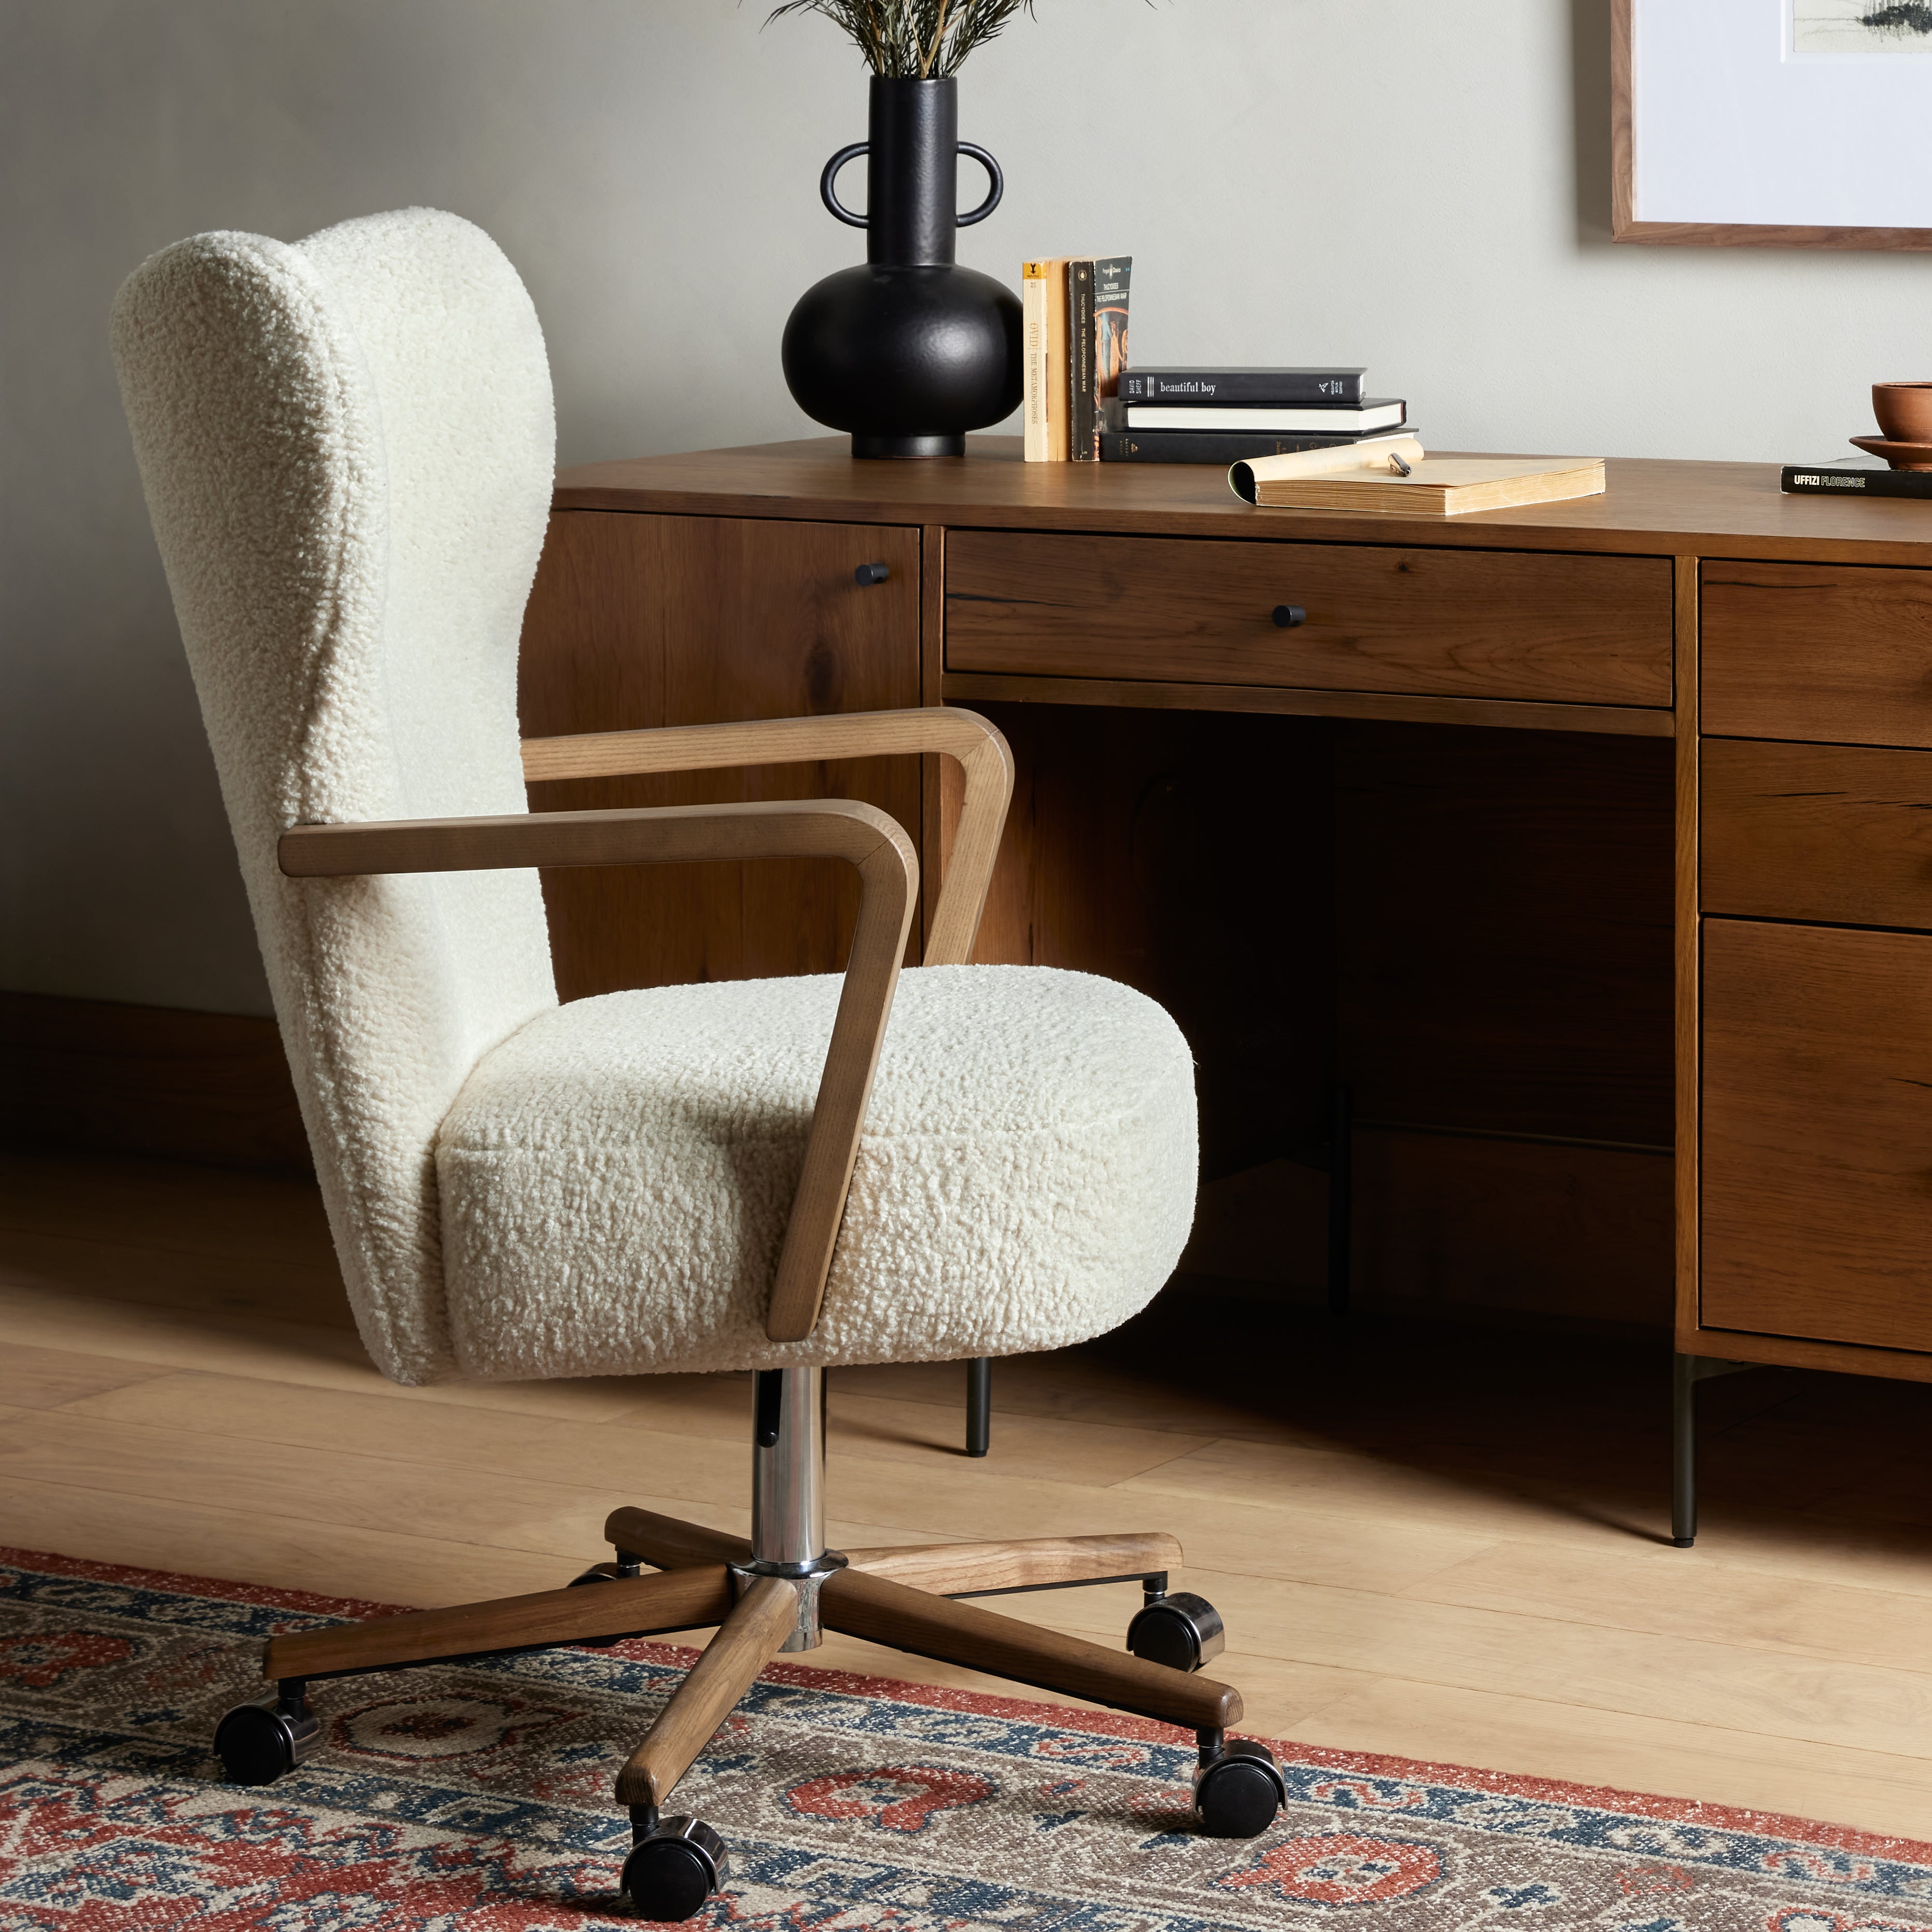 A comfort-driven desk chair features soft, textural upholstery, framed by solid ash arms. A height-adjustable swivel base with casters makes for ease in the modern office. Amethyst Home provides interior design, new home construction design consulting, vintage area rugs, and lighting in the Oklahoma City metro area.